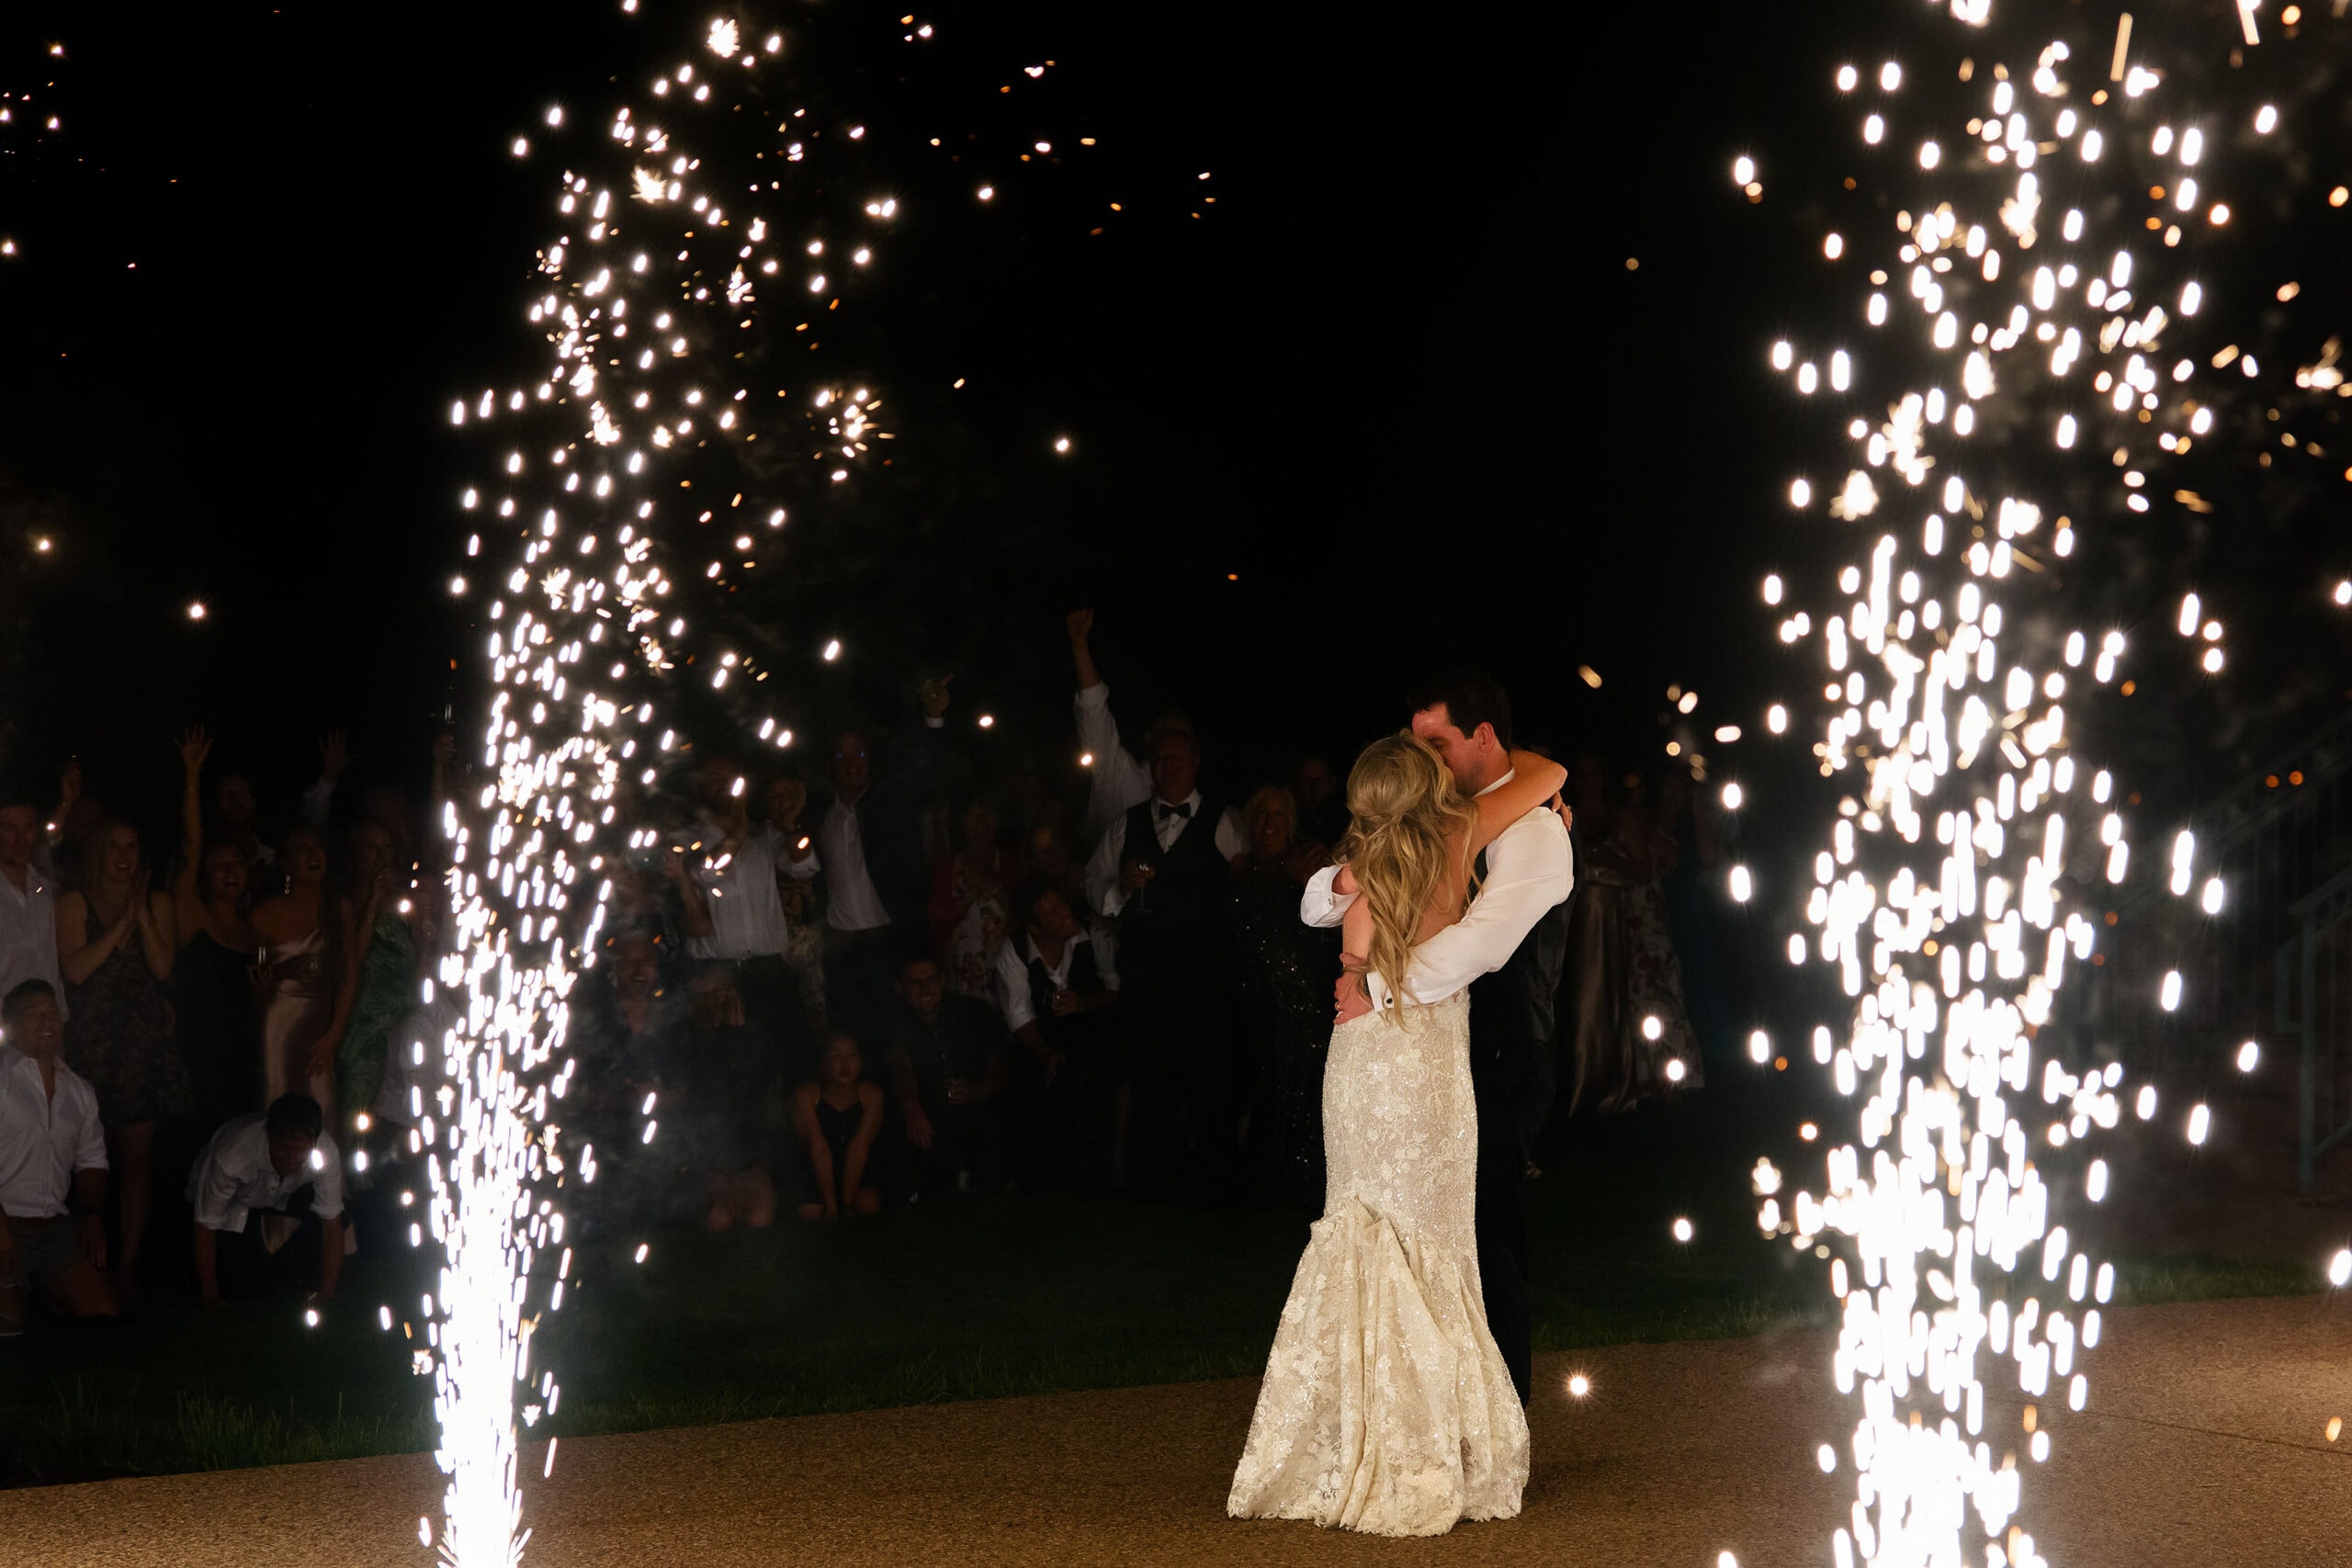 The bride and groom kiss as fireworks go off during their grand exit after their wedding at Garden of the Gods resort